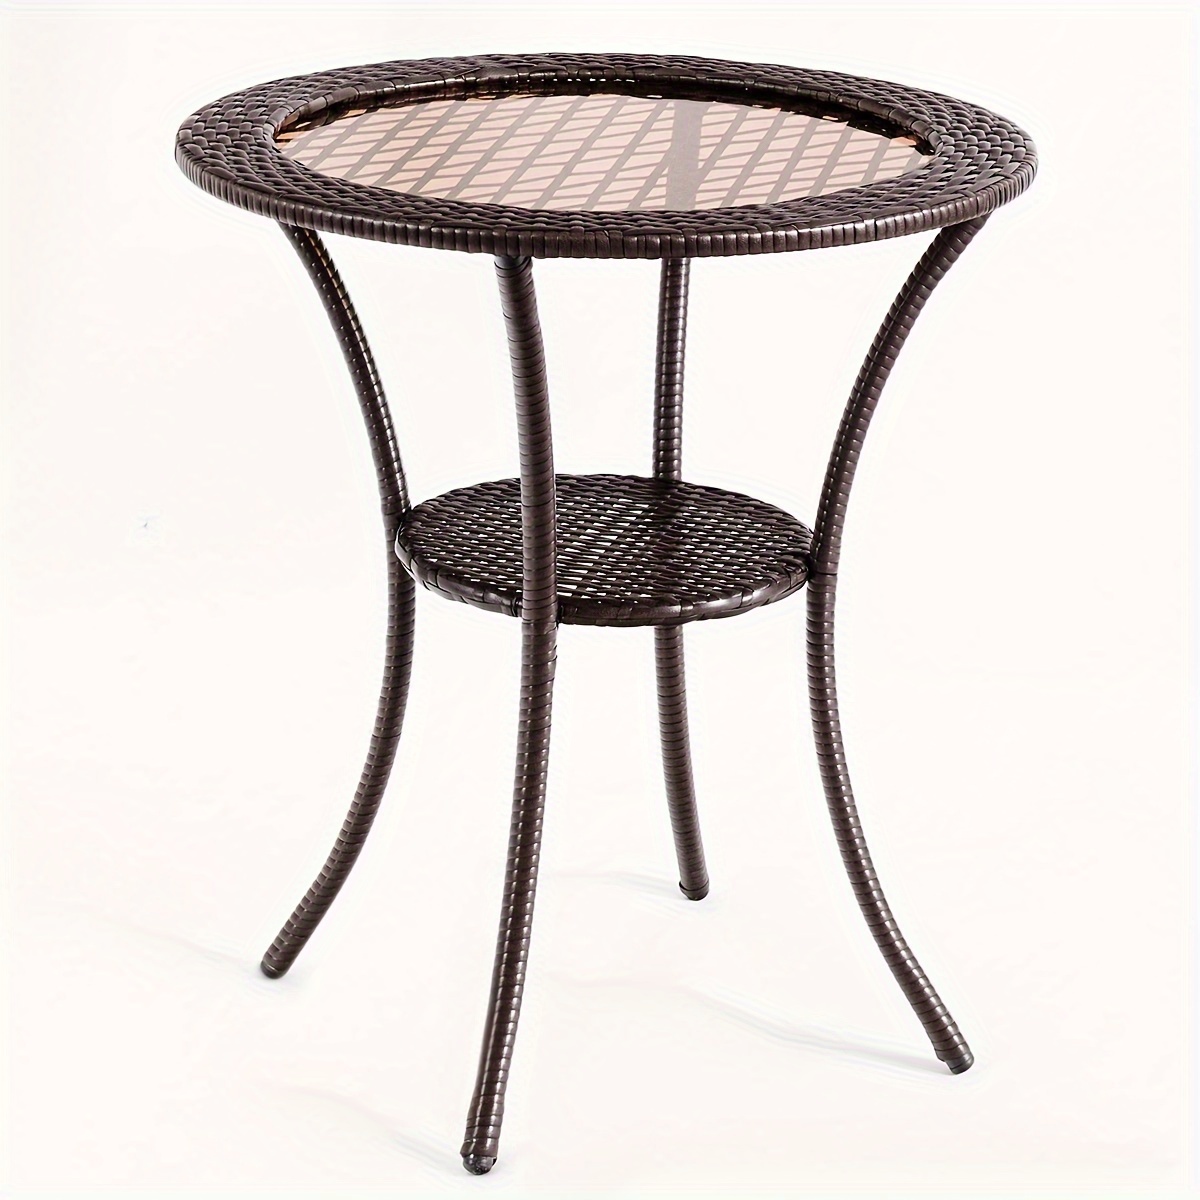 

1pc Round Rattan Wicker Coffee Table, With Glass Top And Steel Frame, Patio Furniture With Lower Shelf, Bistro Table, Outdoor End Table For Patio, Backyard, Pool, Patio Dining Table